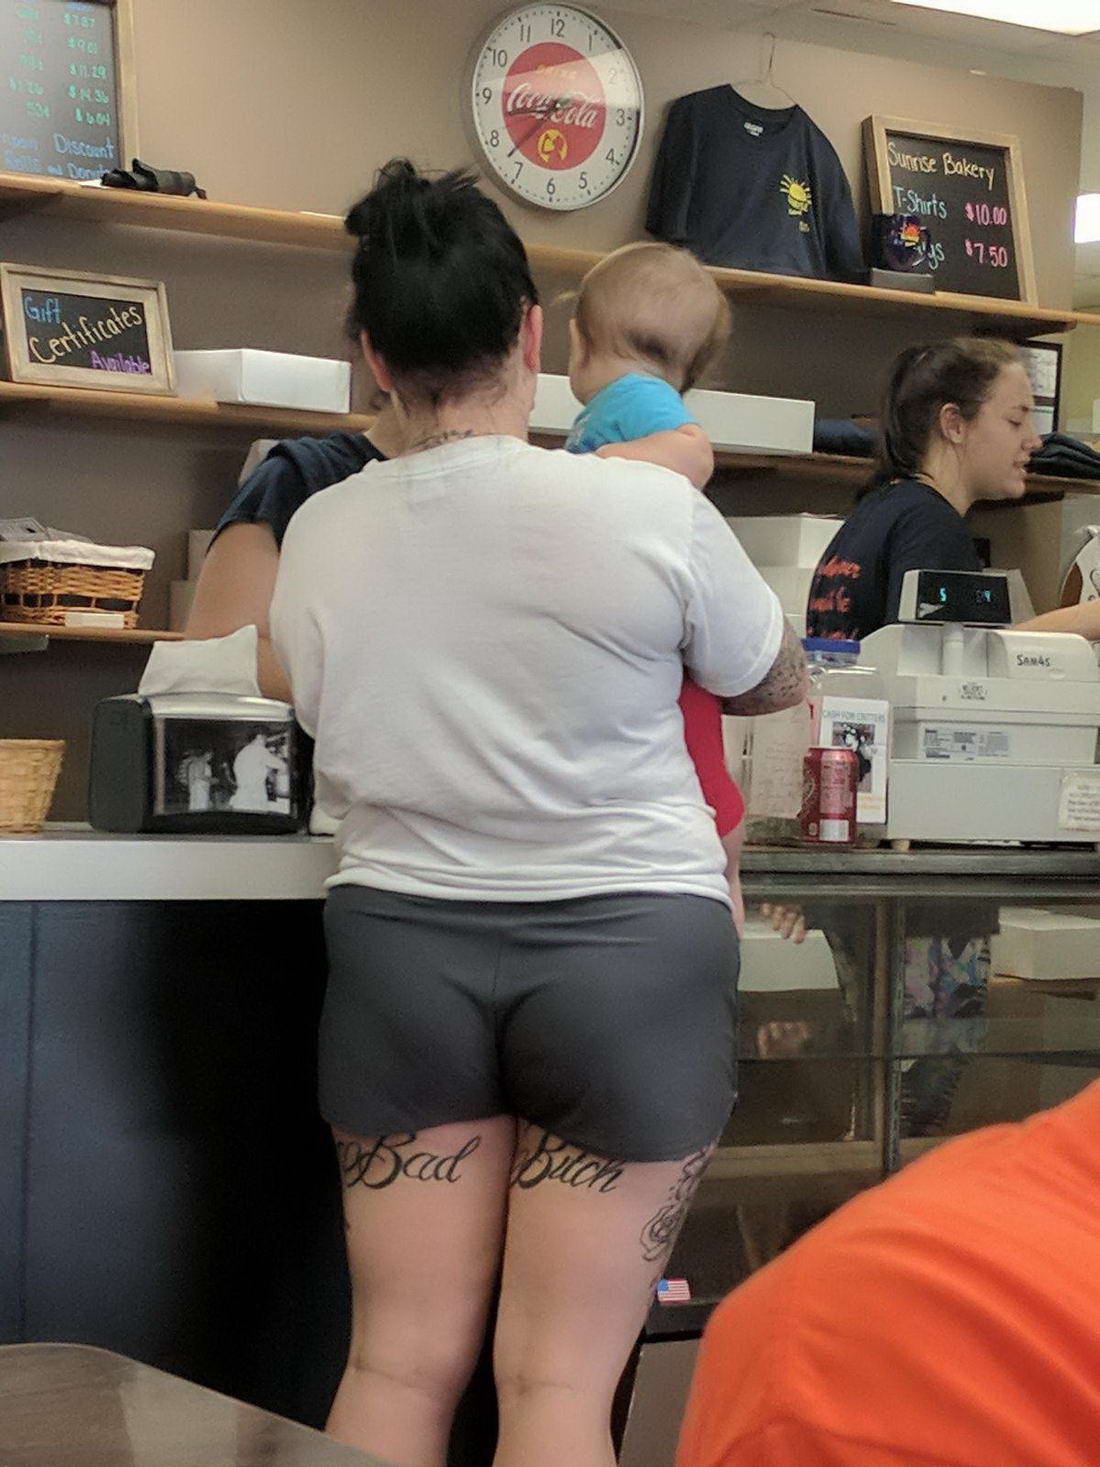 woman with tattoos on legs that say bad bitch